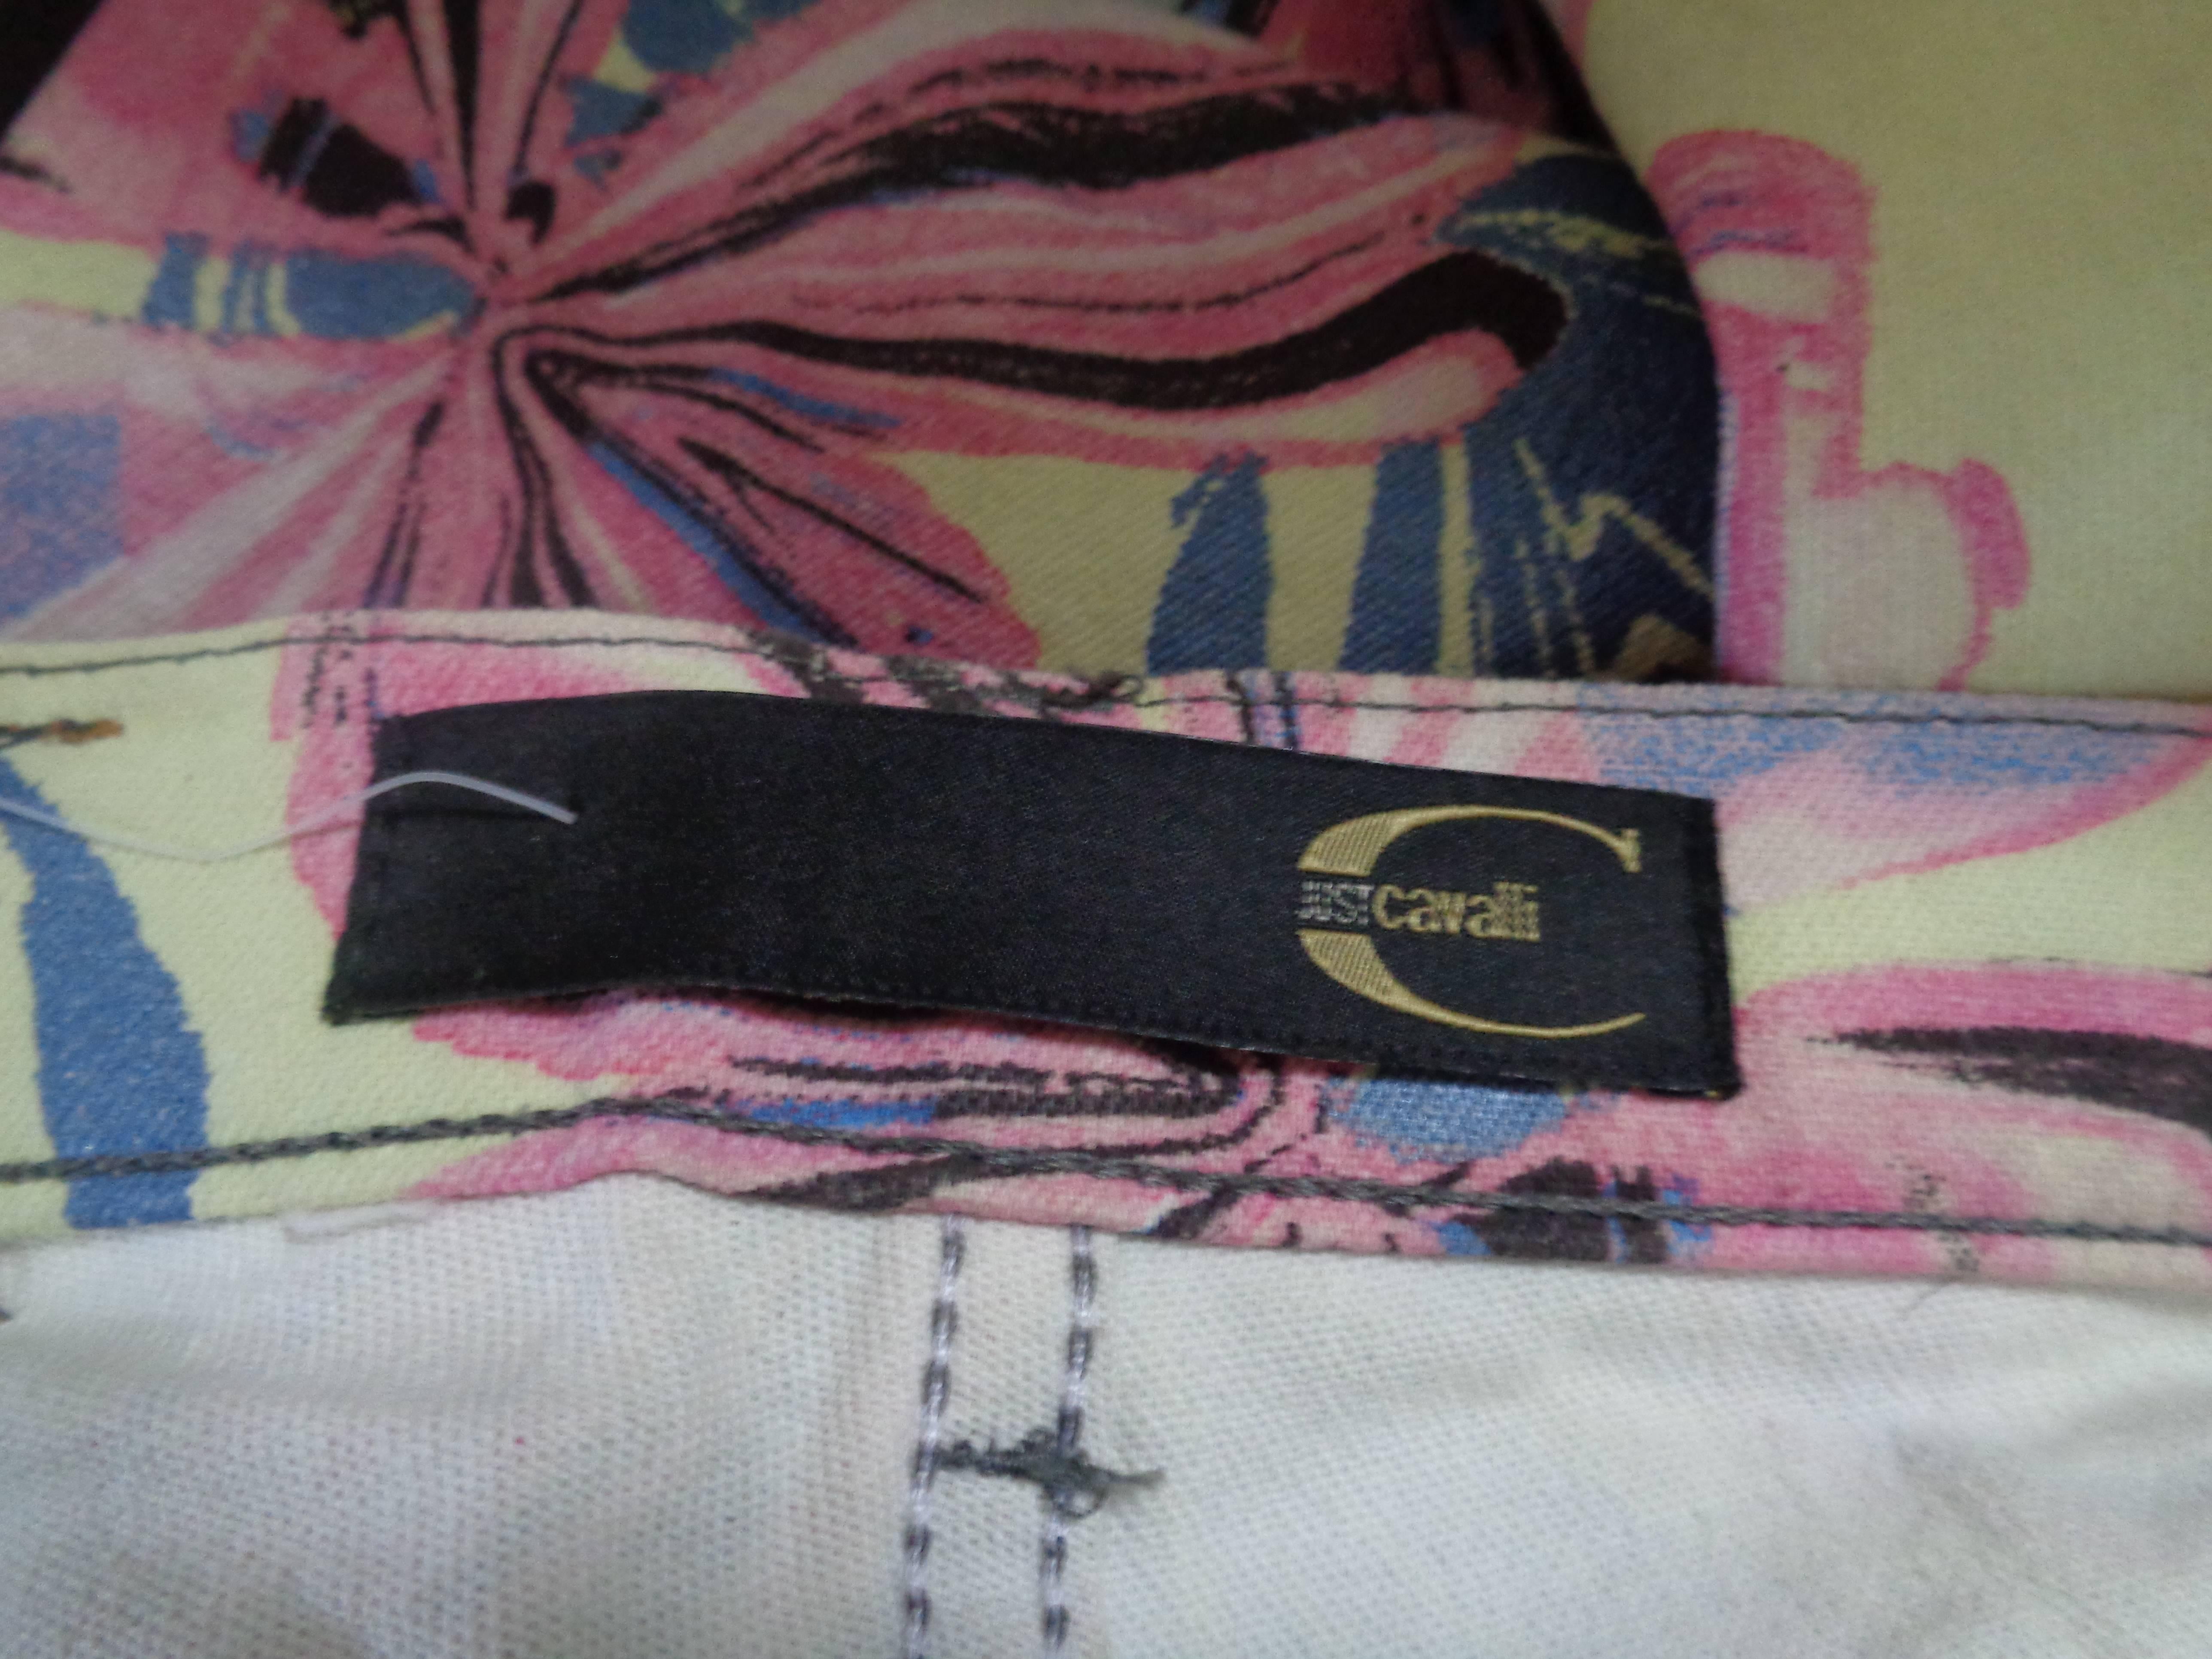 Just Cavalli Light Yellow Pink Light Blu Trousers In Excellent Condition For Sale In Capri, IT